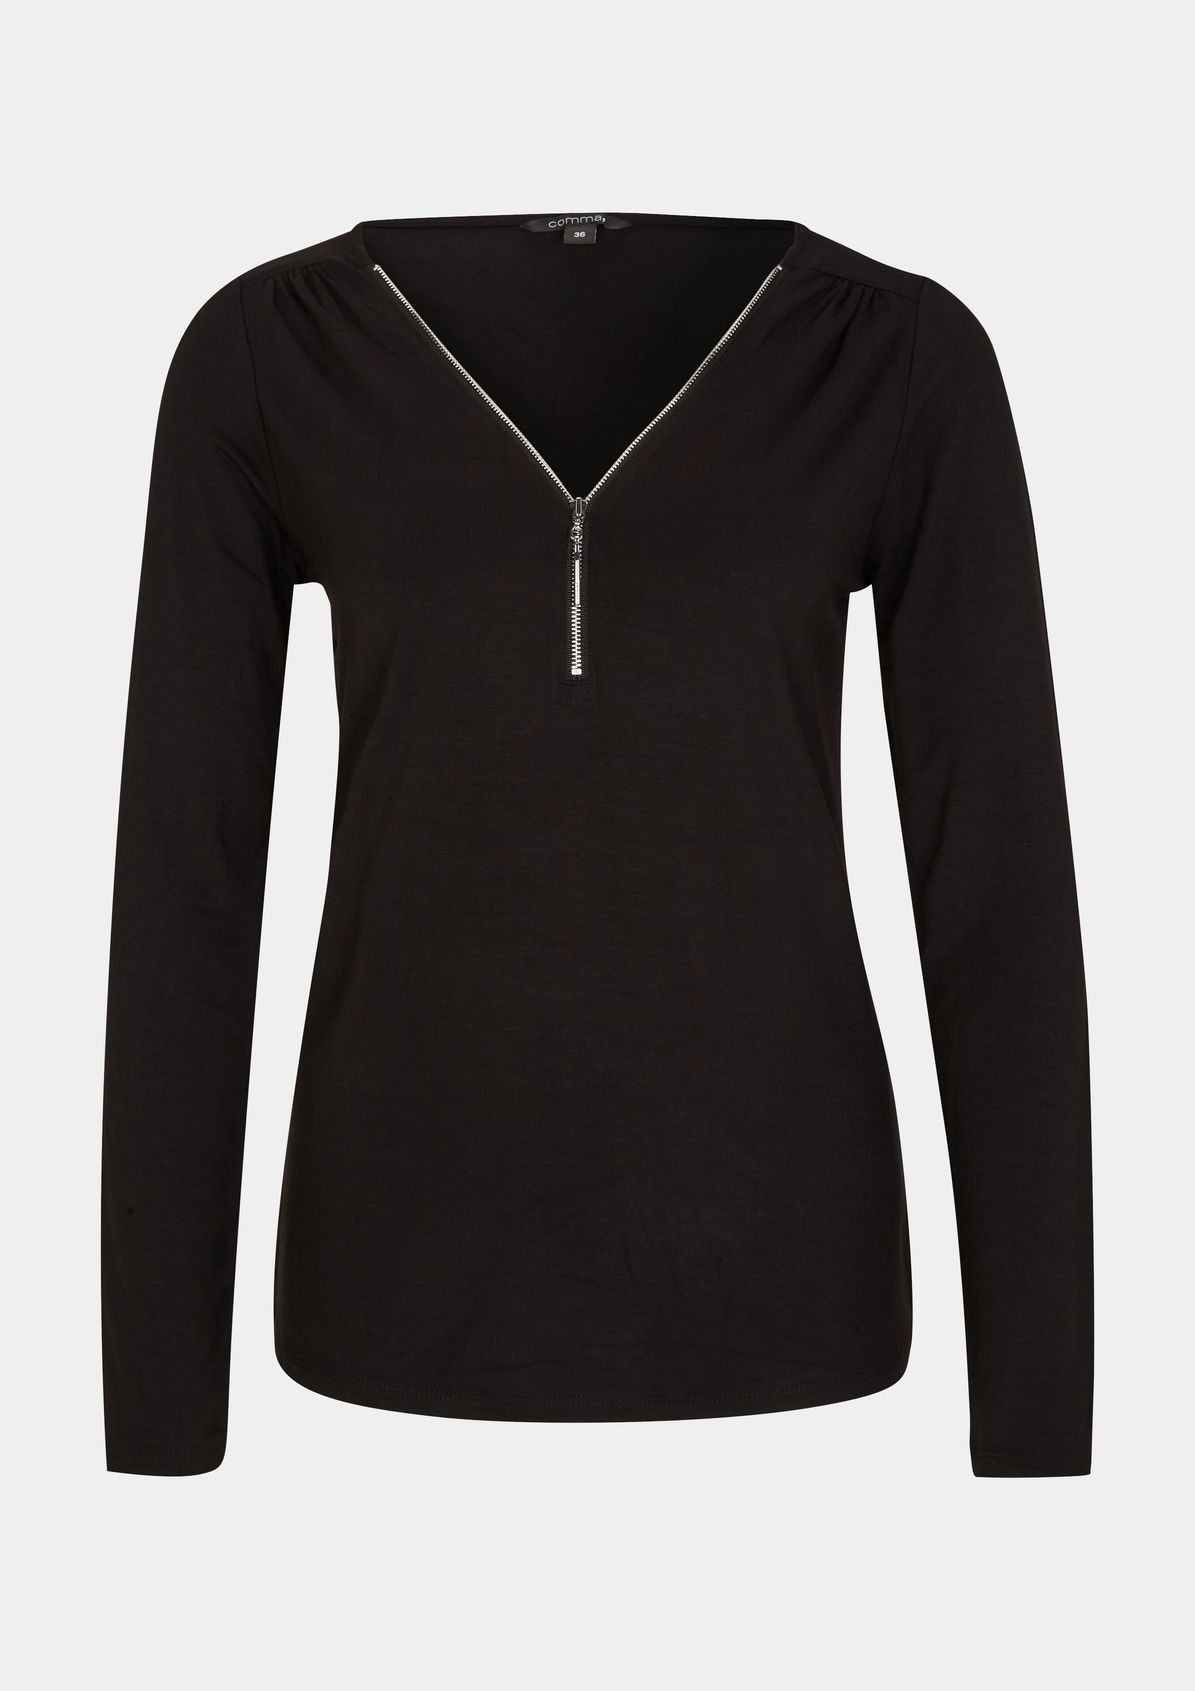 Top with a zip detail from comma